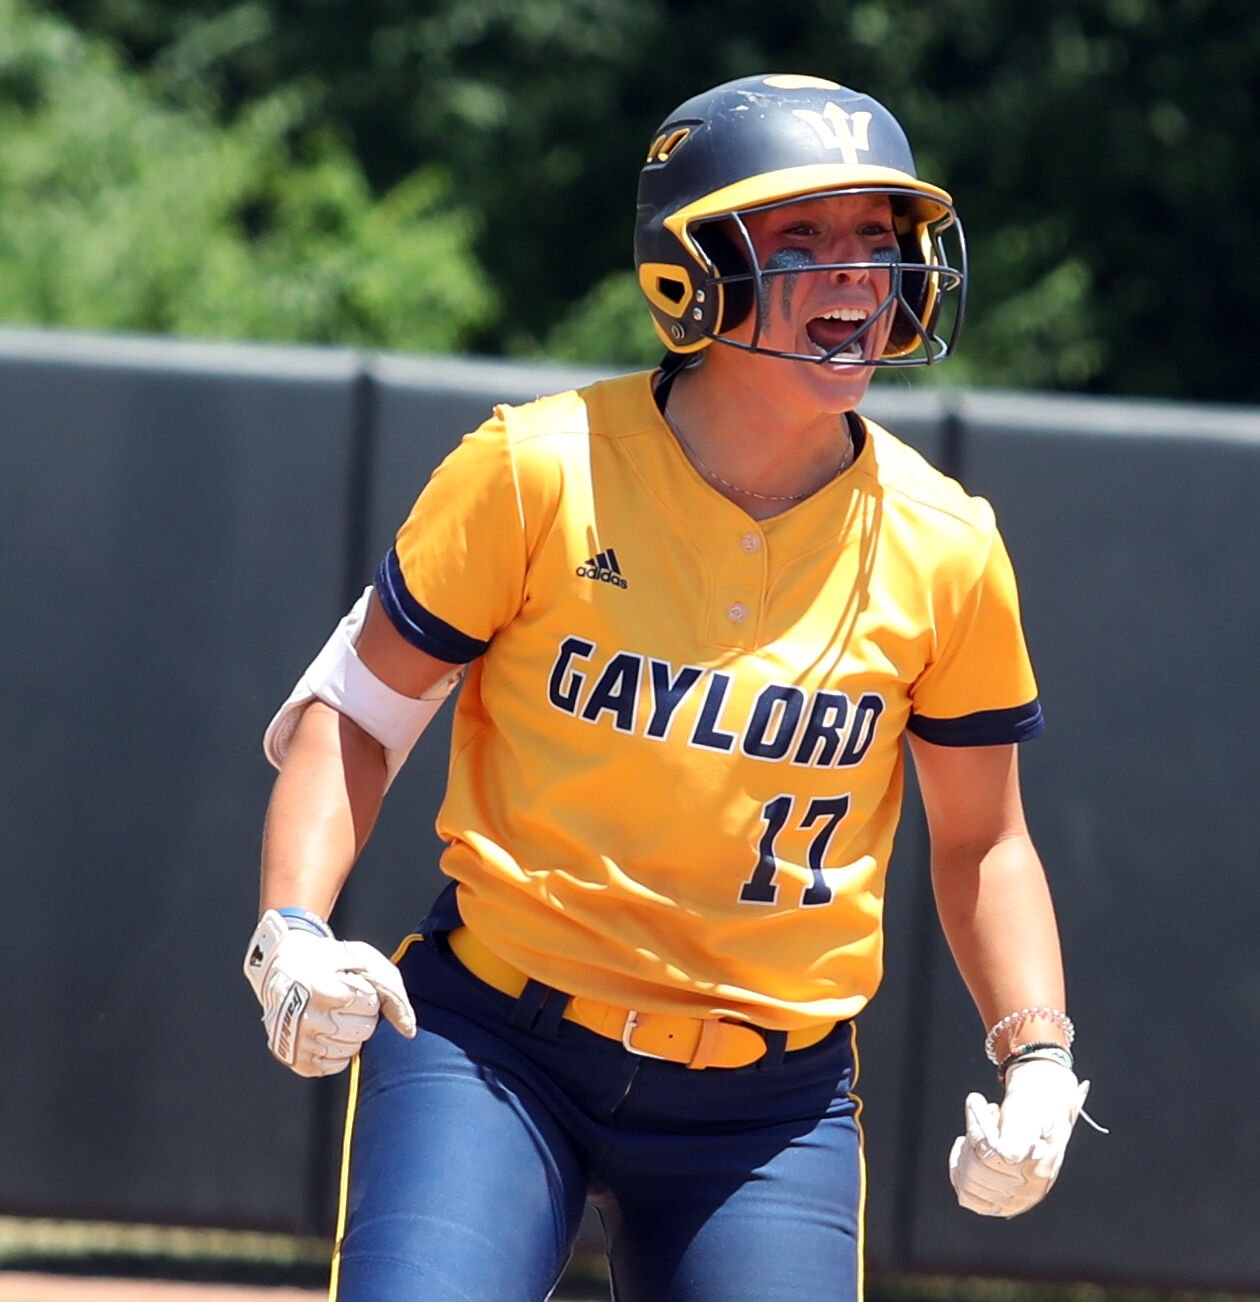 Gaylord Secures 2nd Consecutive State Softball Title in 8-Inning Showstopper vs. Vicksburg 3-2